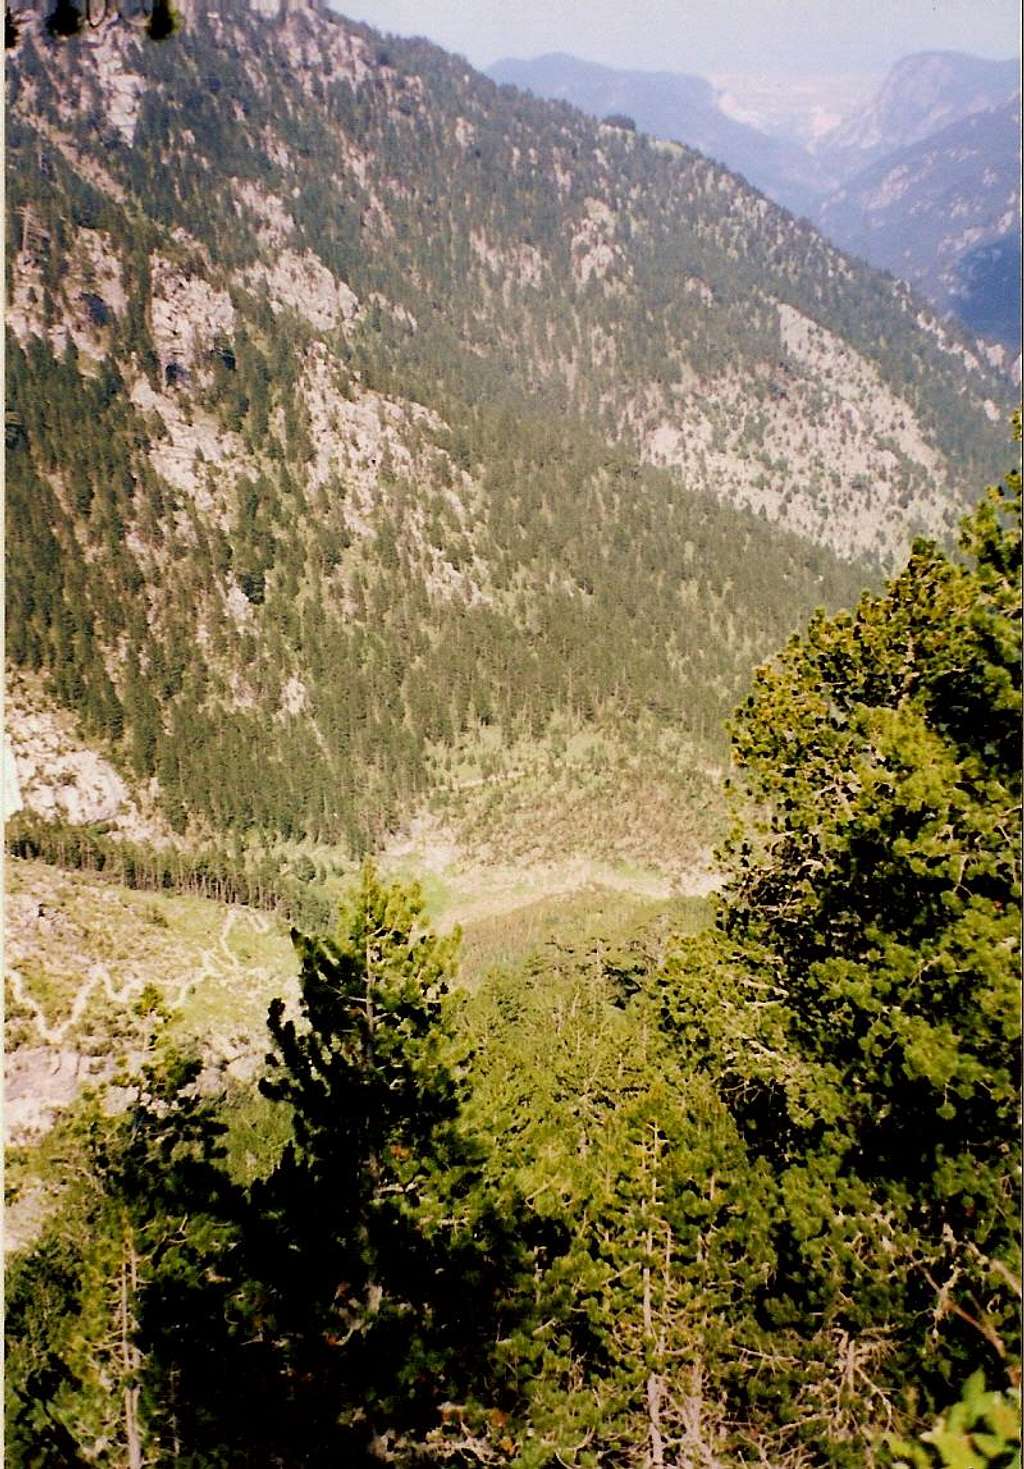 Enipeas gorge from refuge A(2100m).Litoxoro is sparcely seen in the distance